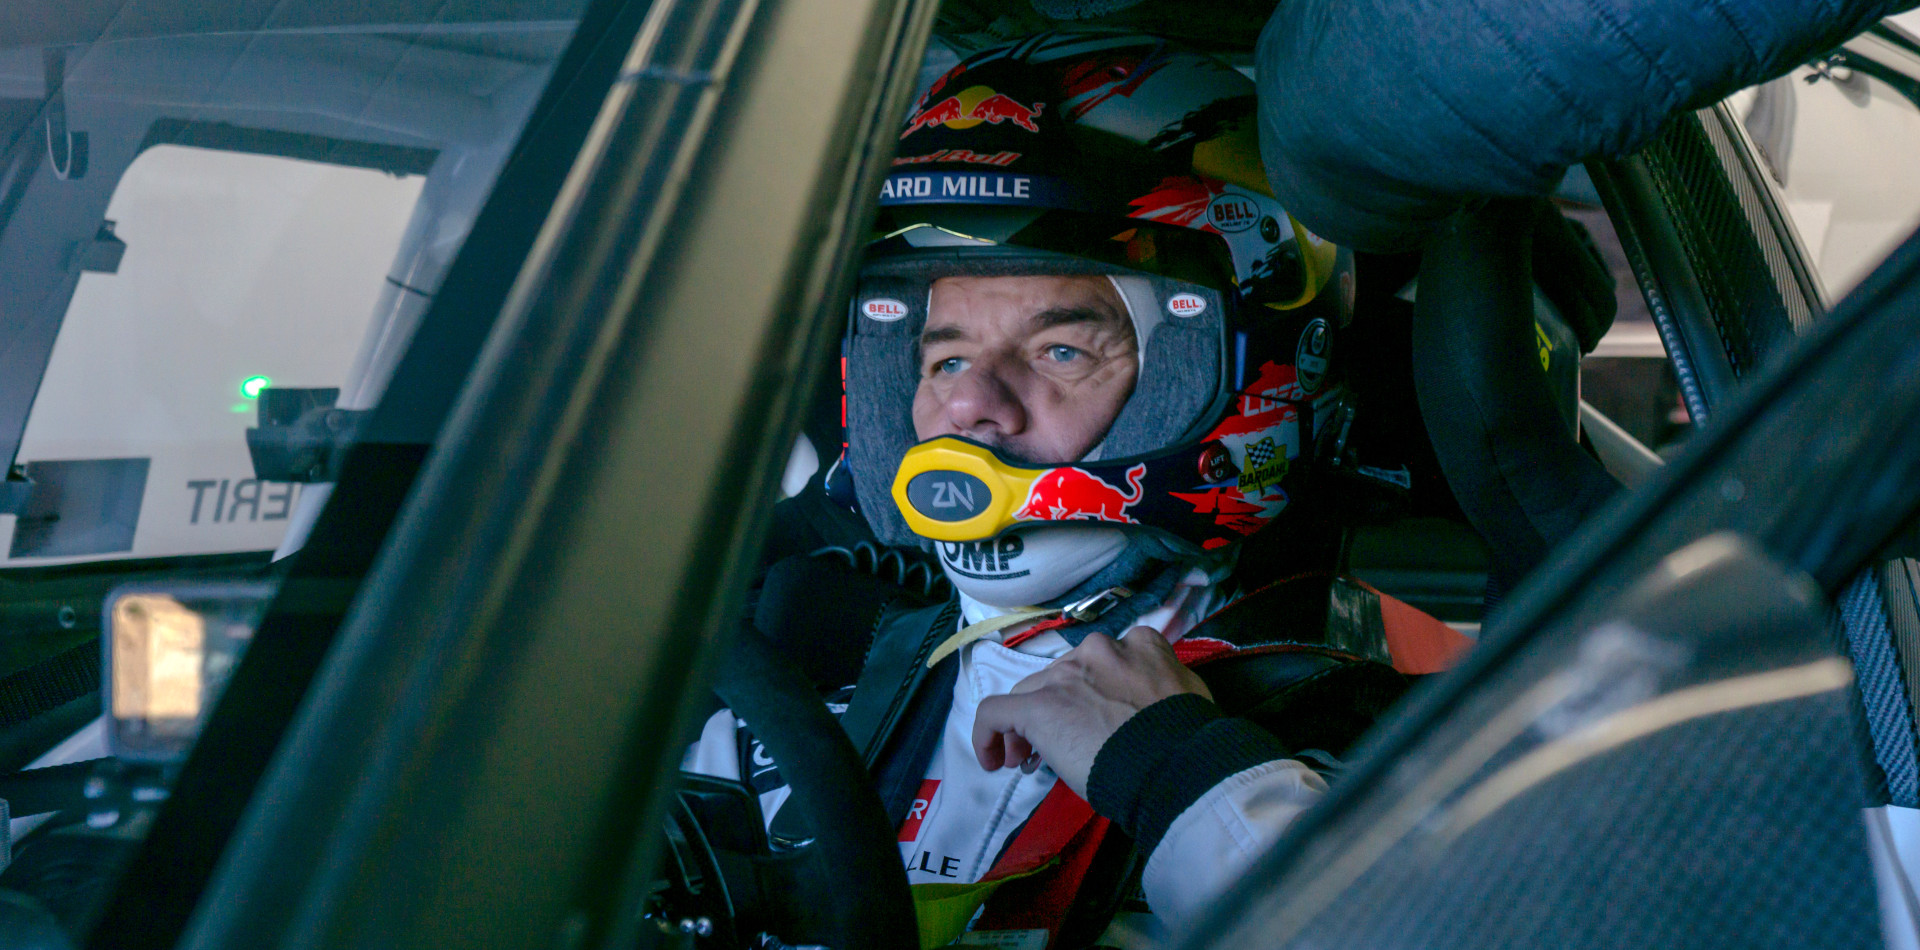 Racing Force Group partners with rally legend Sébastien Loeb